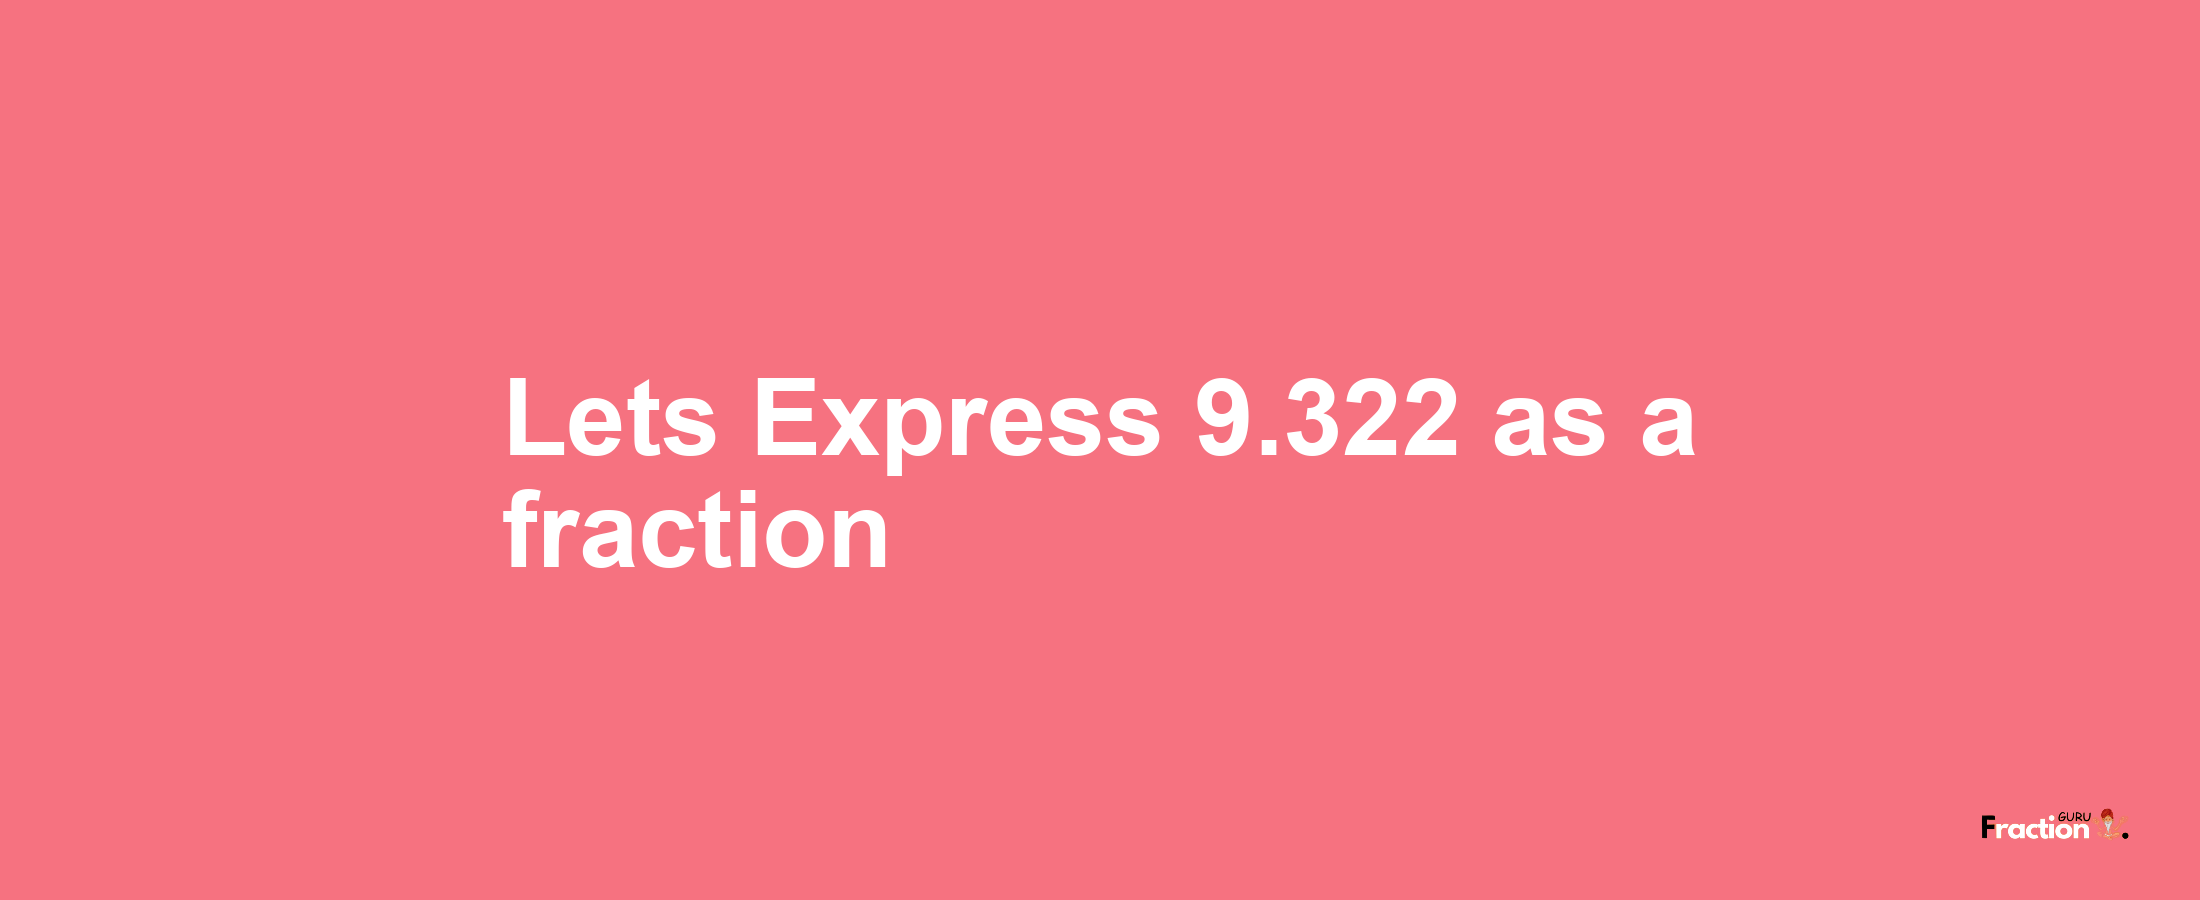 Lets Express 9.322 as afraction